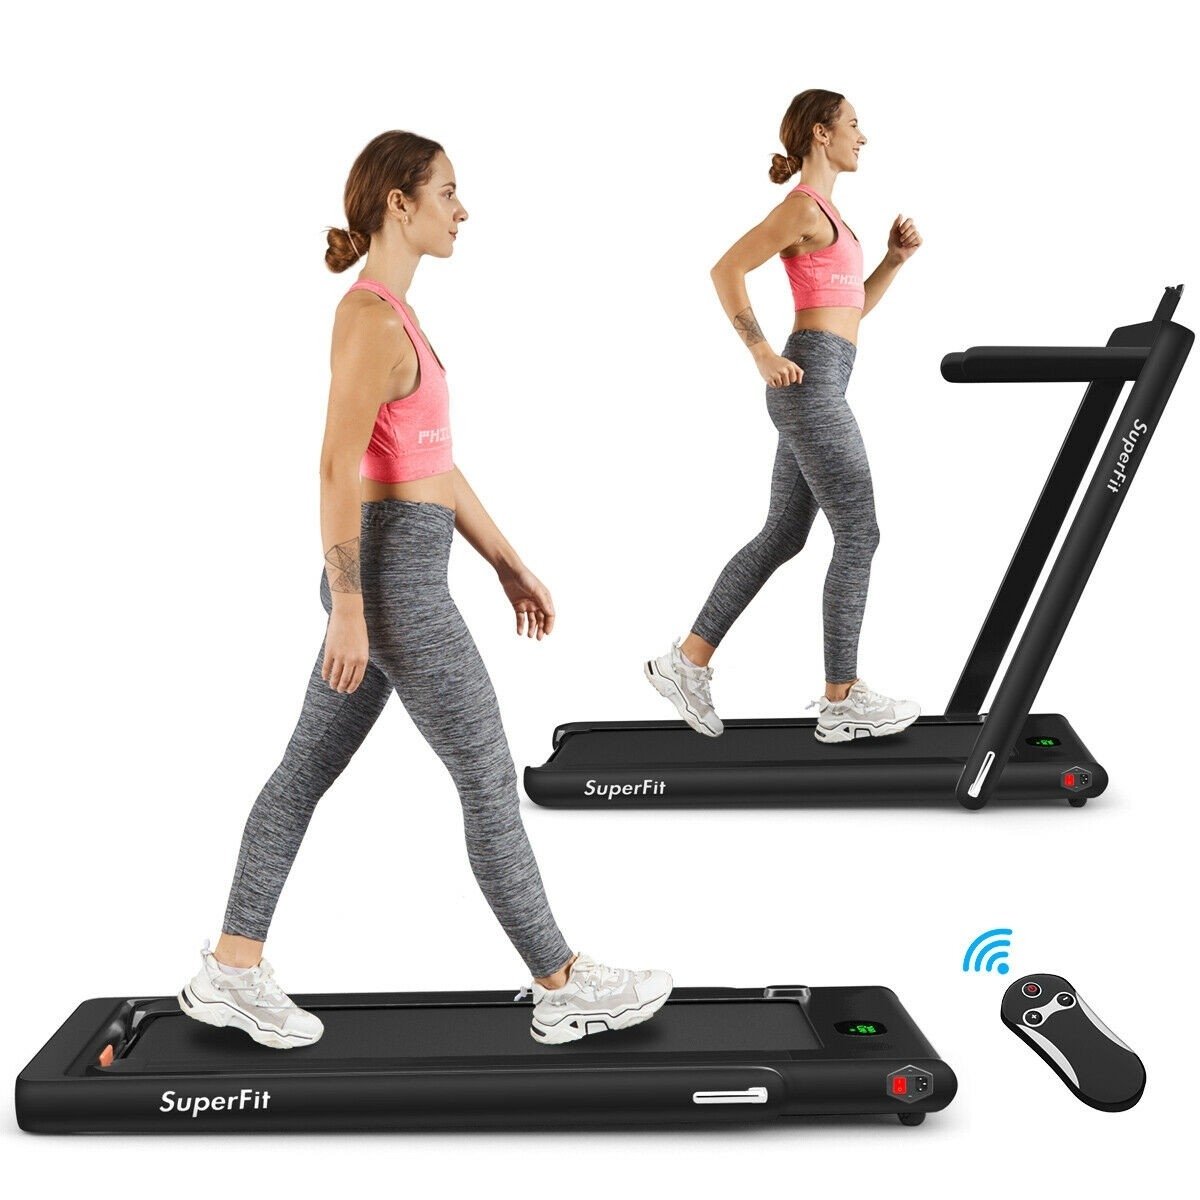 Treadmill Workout Walking Machine Electric with LCD Display and Remote Control Portable Compact Treadmill for Jogging and Walking Exercise Machine Home Gym 